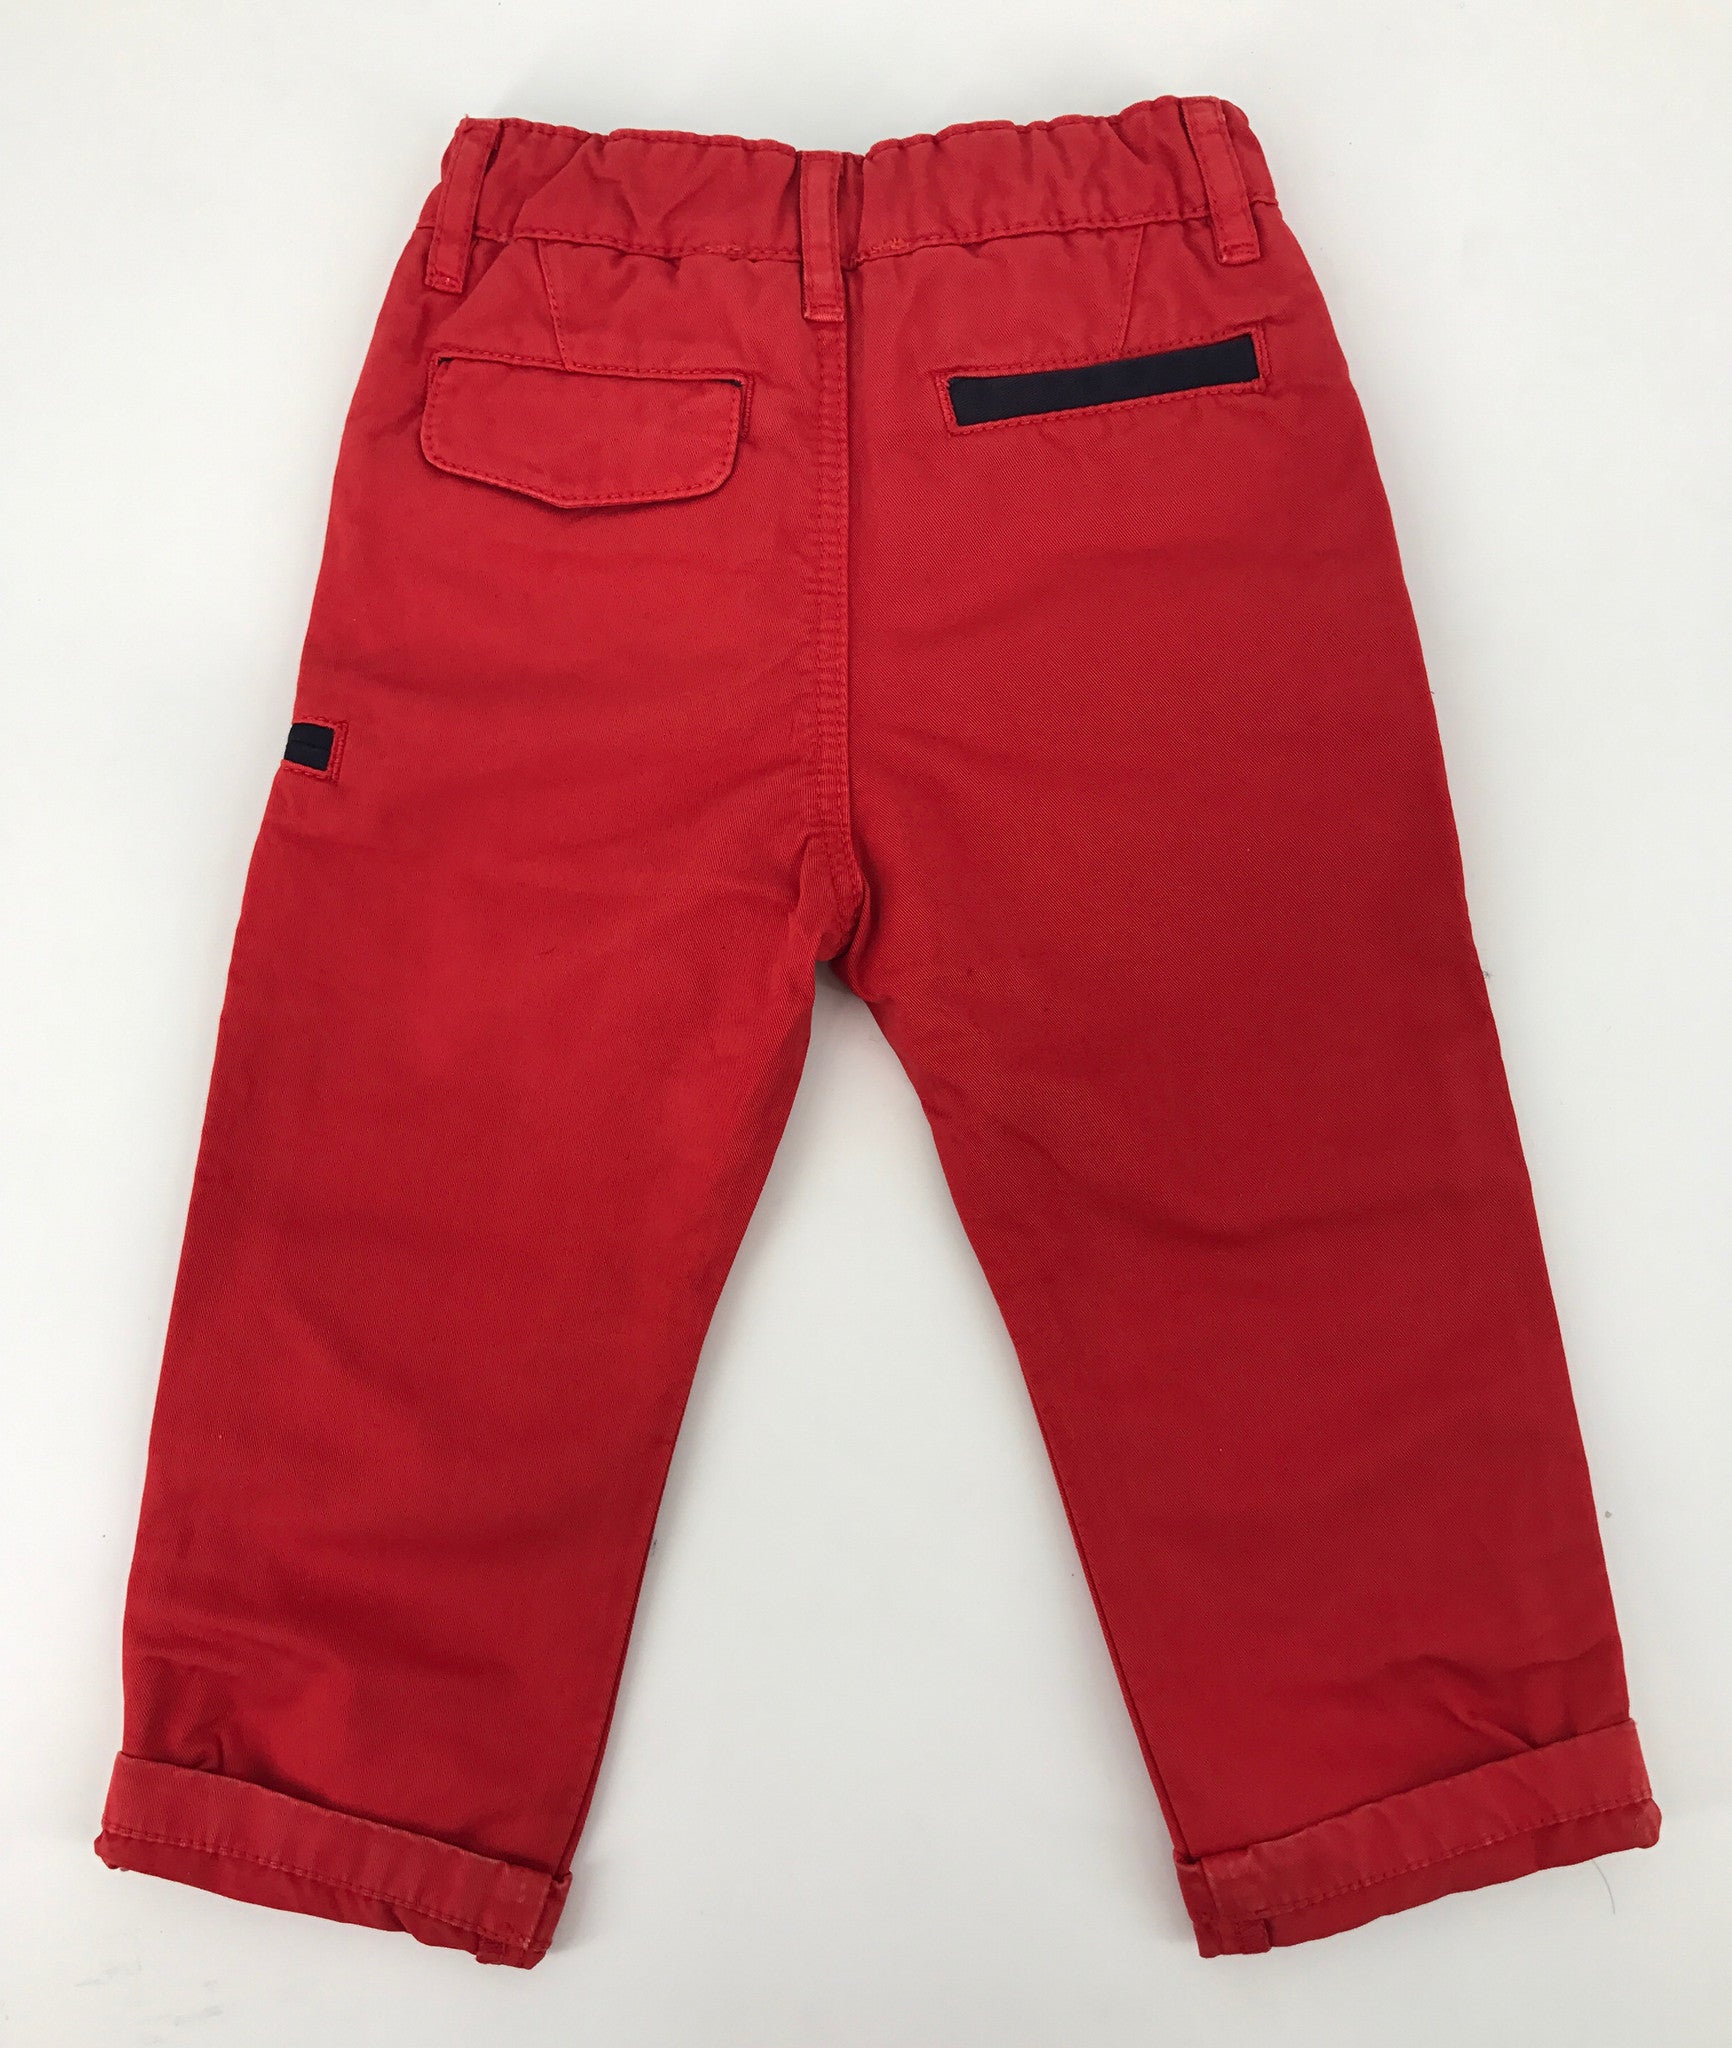 Baby Boys Red Chinos with Black Trim - CÉMAROSE | Children's Fashion Store - 2